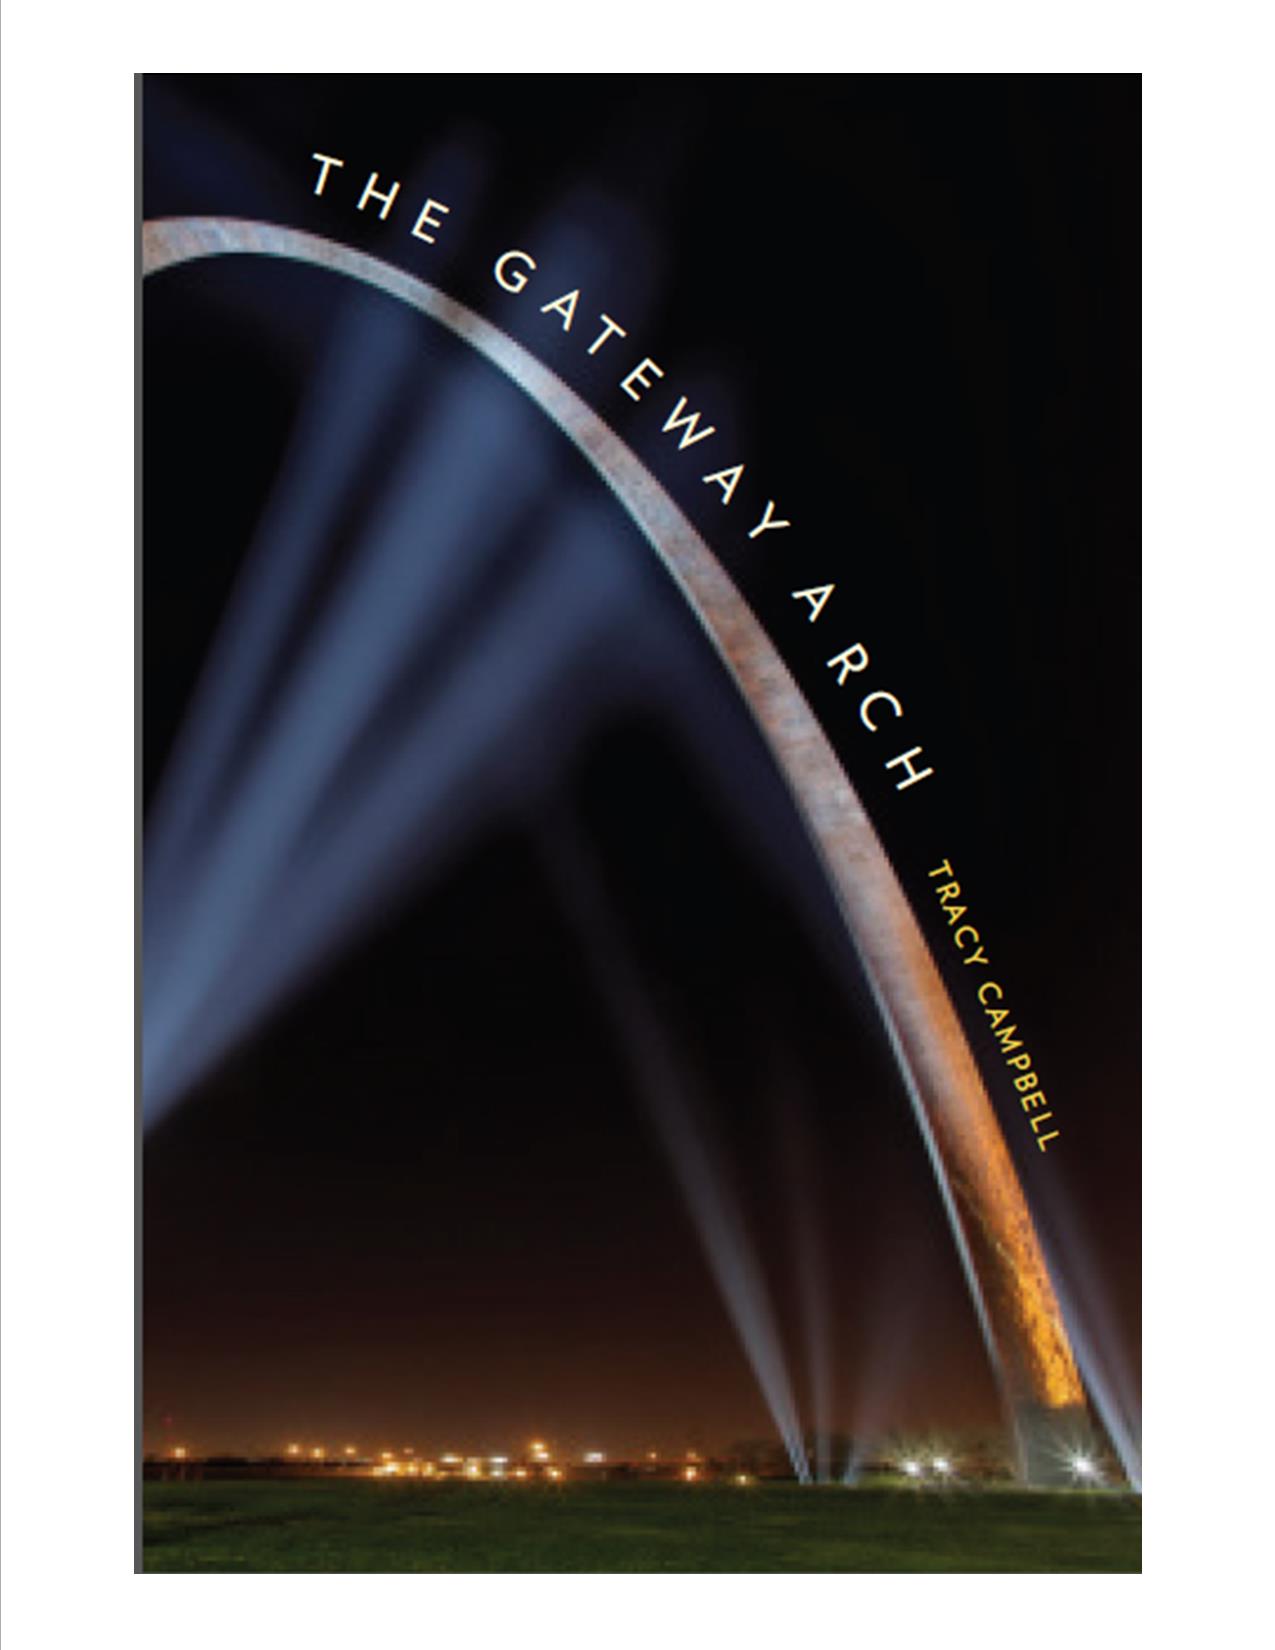 UK History professor Tracy A. Campbell's most recent work, The Gateway Arch: A Biography, is already drawing national attention.  Campbell will discuss his book on National Public Radio's Weekend Edition with Scott Simon this weekend.